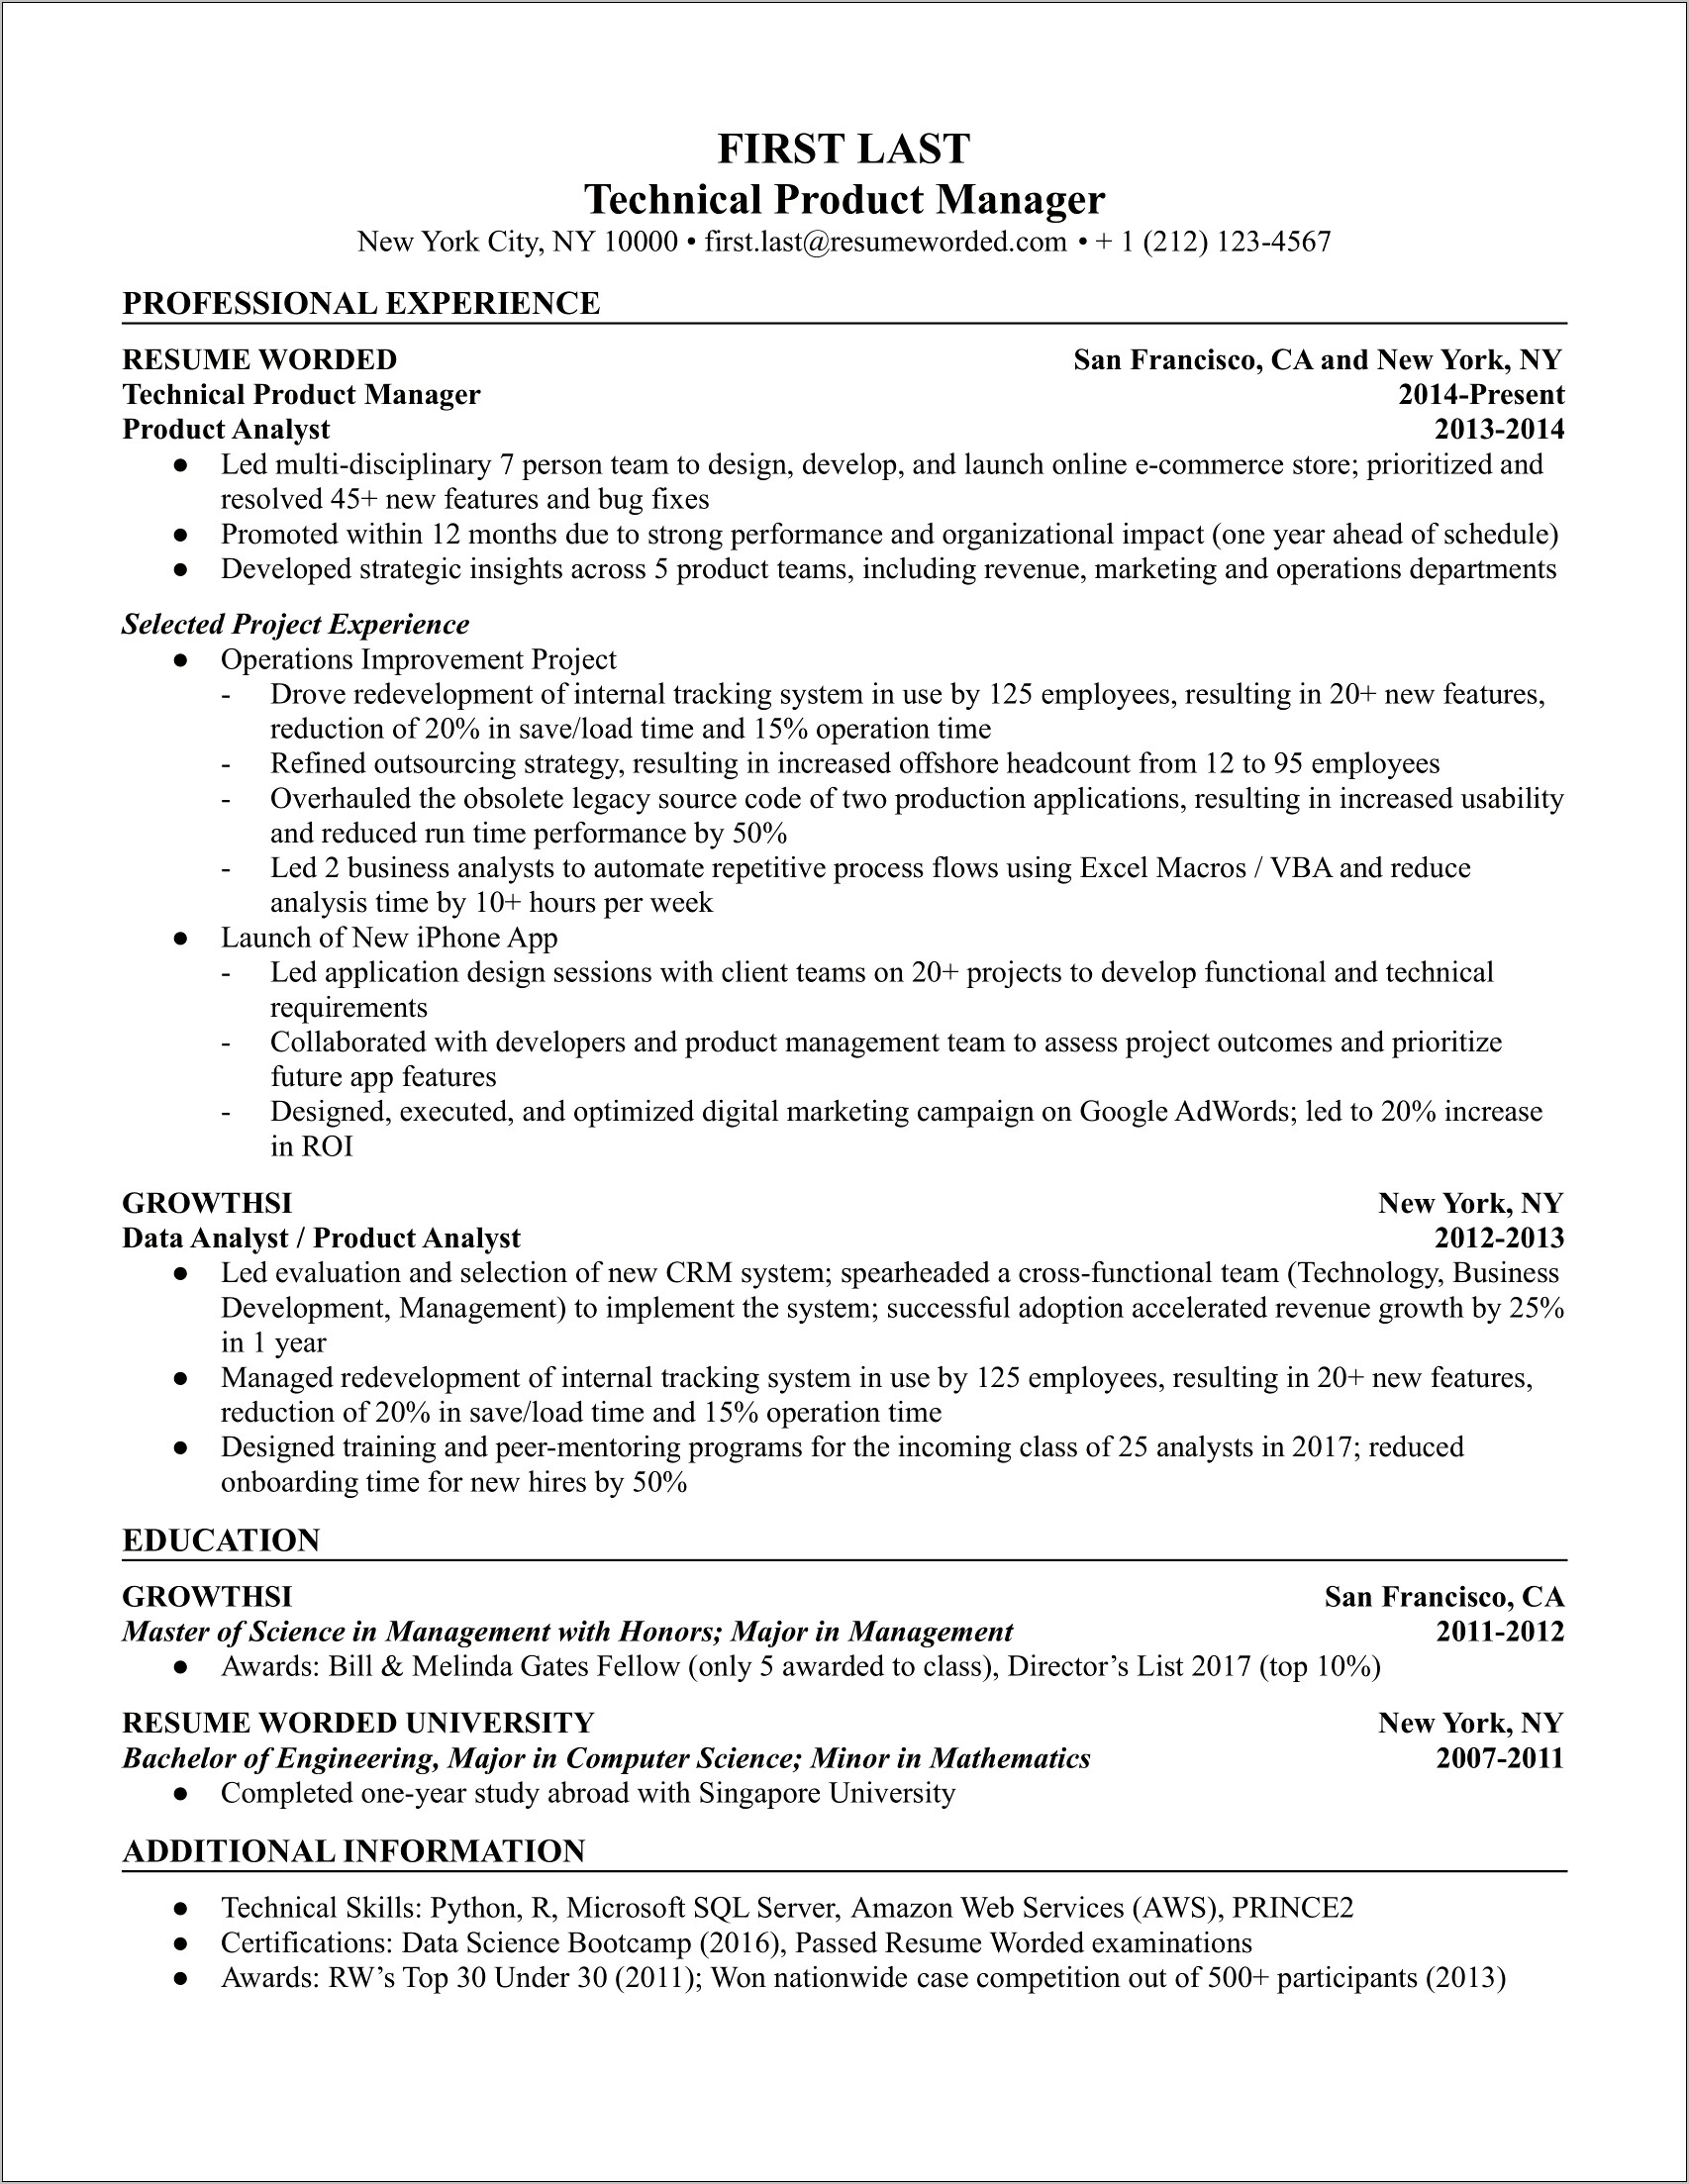 Product Manager Resume Format Filetype Docx